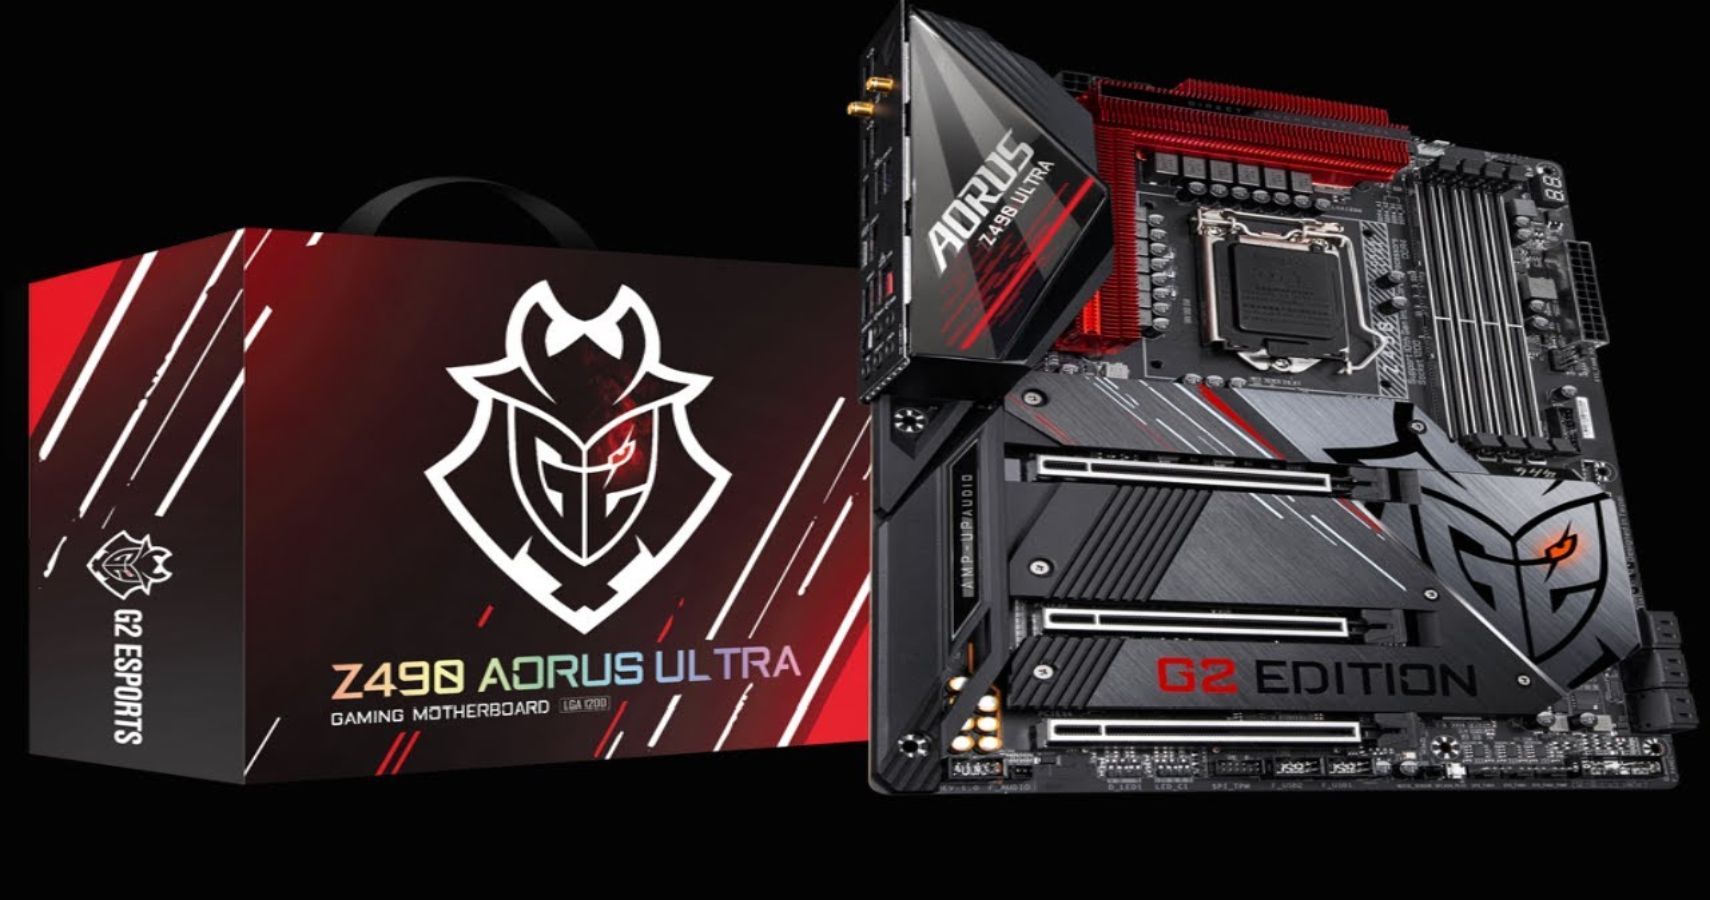 The Z490 Aorus Ultra G2 Gaming Motherboard Comes Backed By KennyS